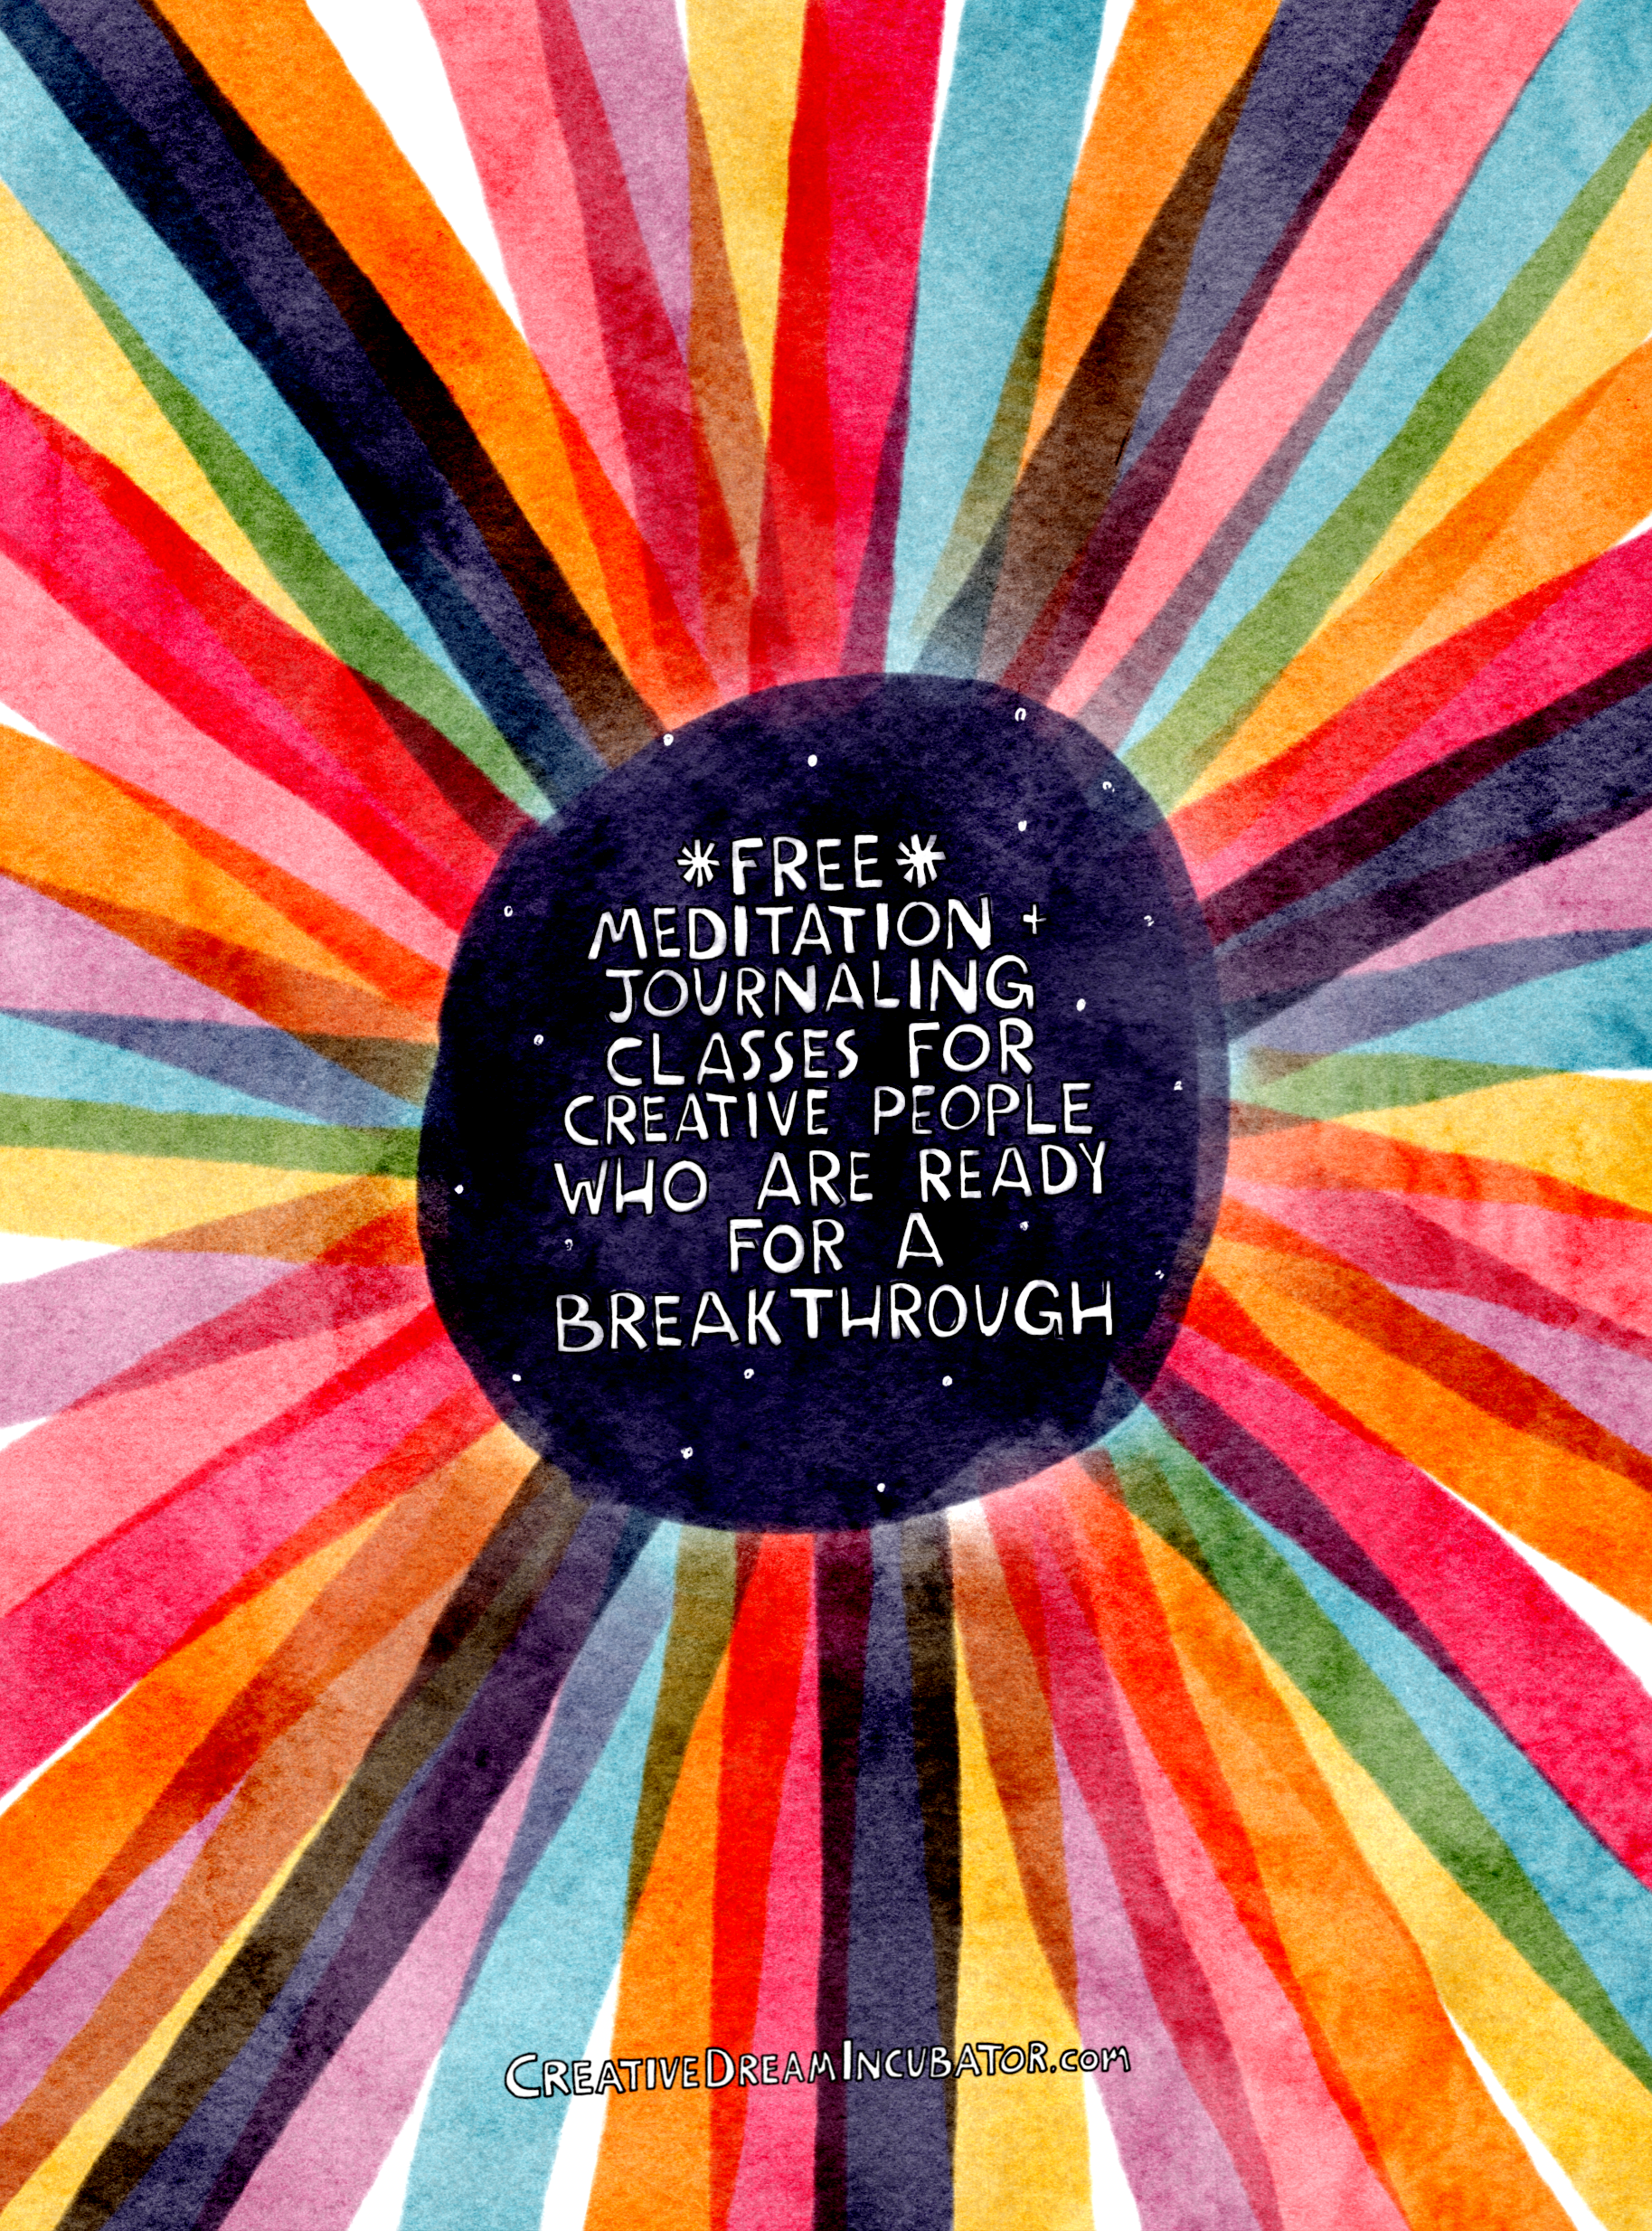 Free Meditation + Journaling Classes for Creative People Who Are Ready For A Breakthrough